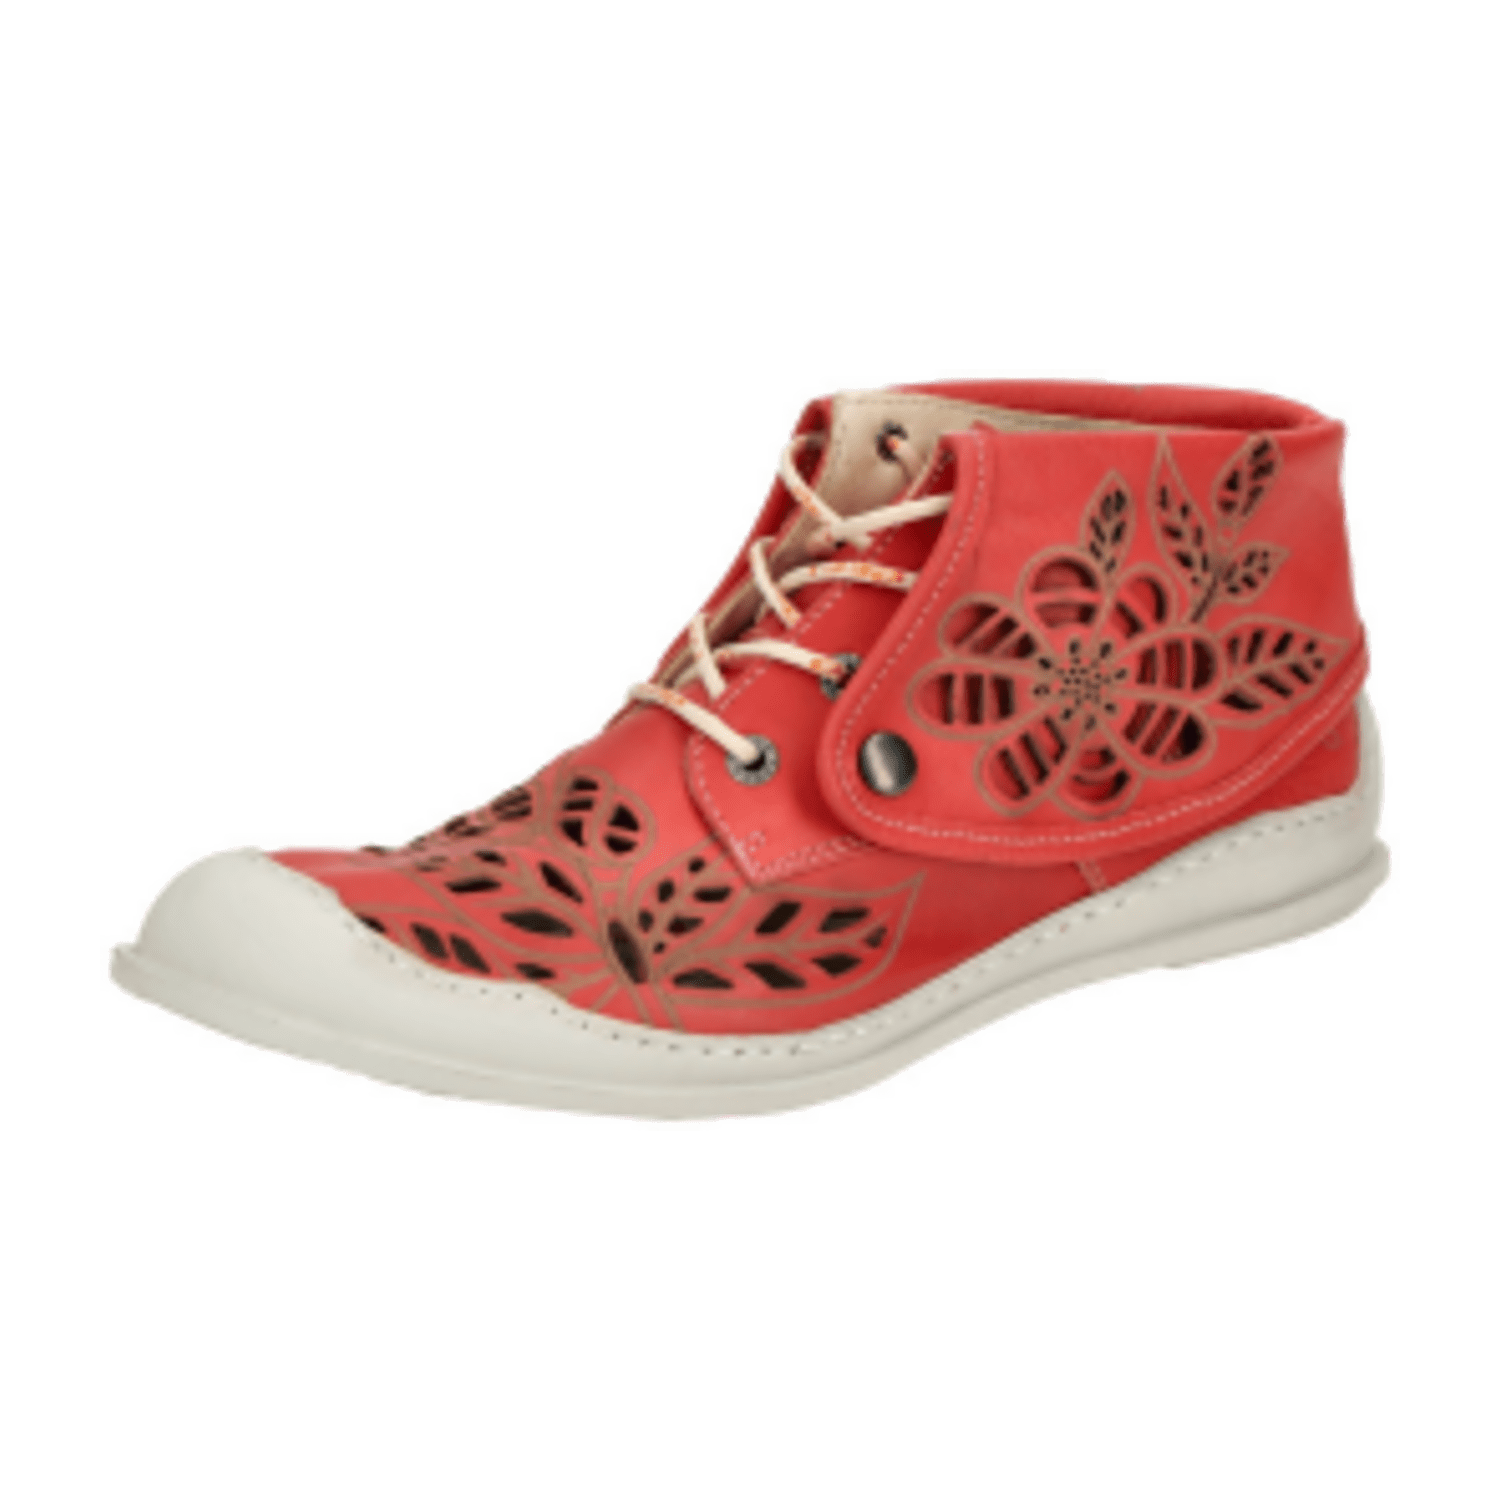 Eject Ciber Schuhe rot Sommer Stiefelette